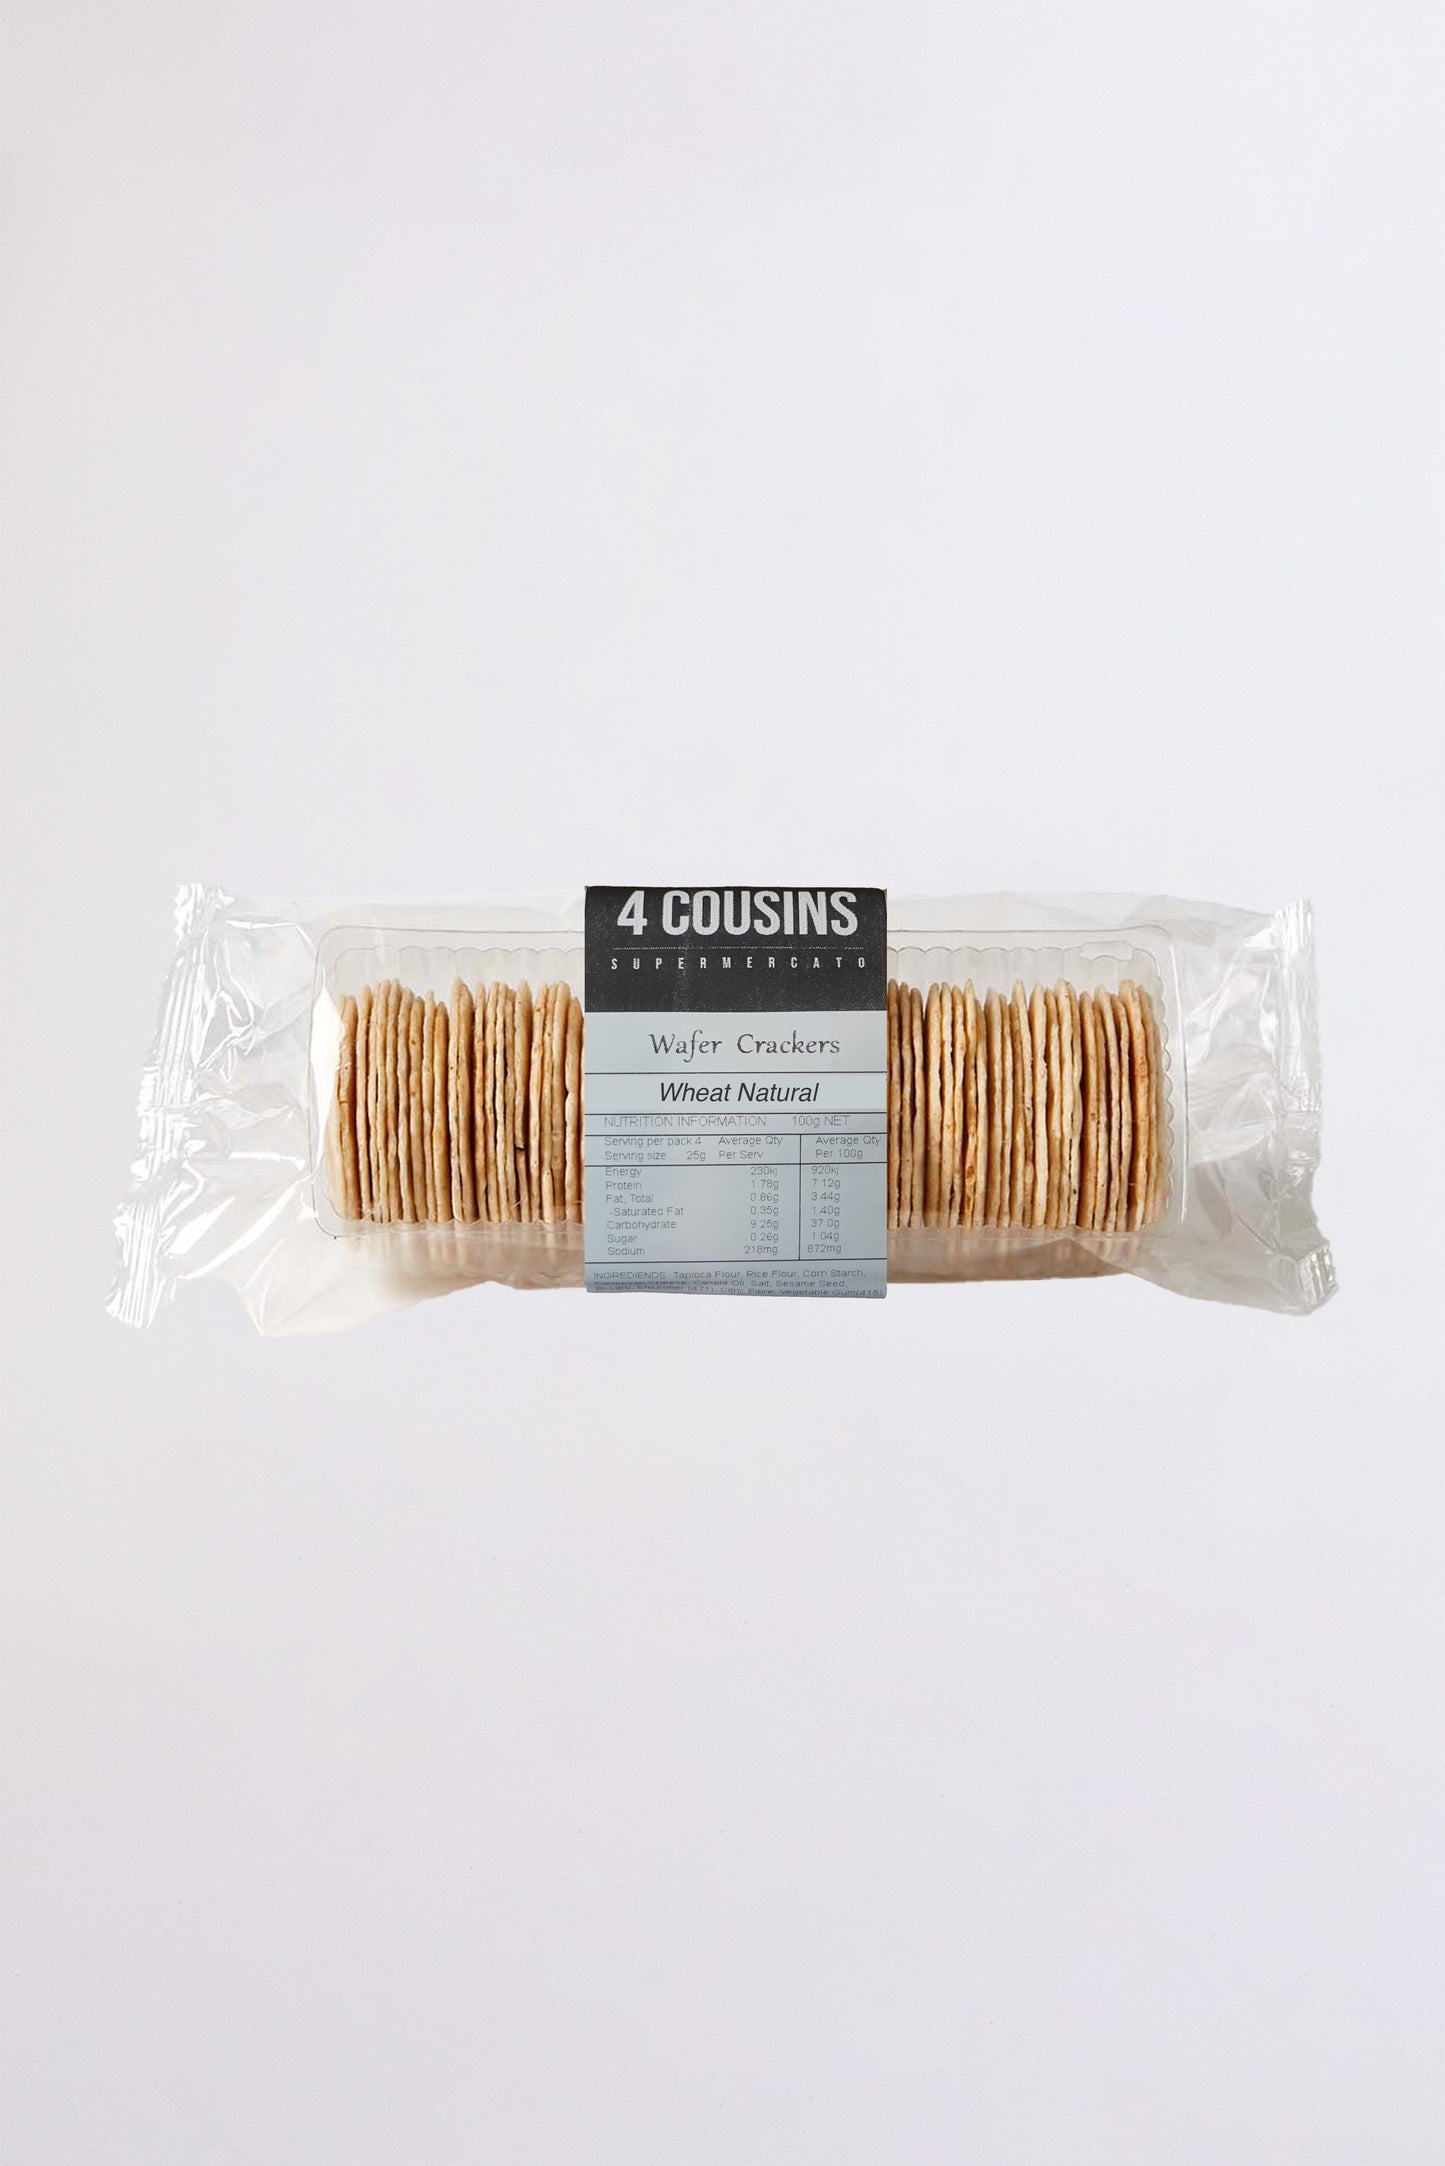 4 Cousins Wafer Crackers | Wheat Natural